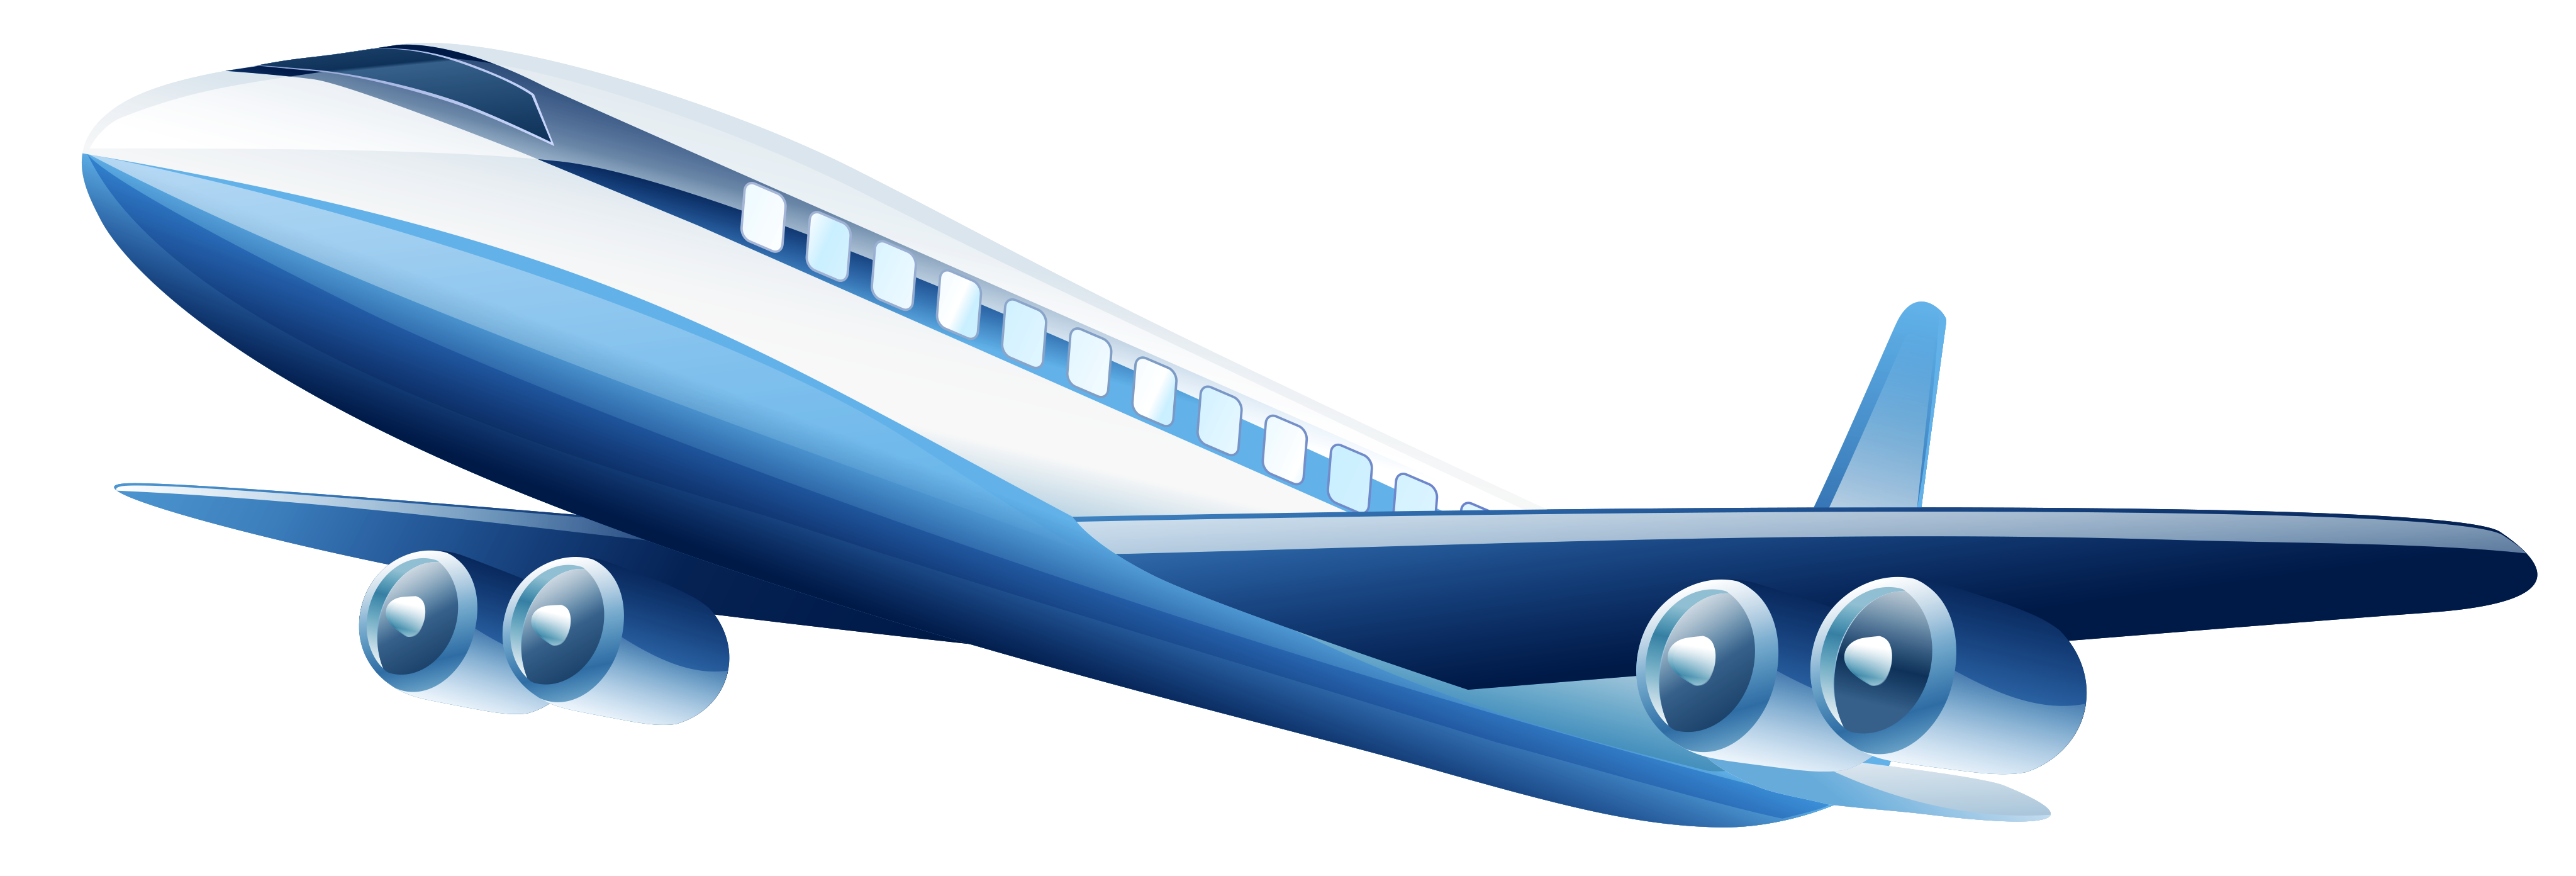 Airplane PNG Image